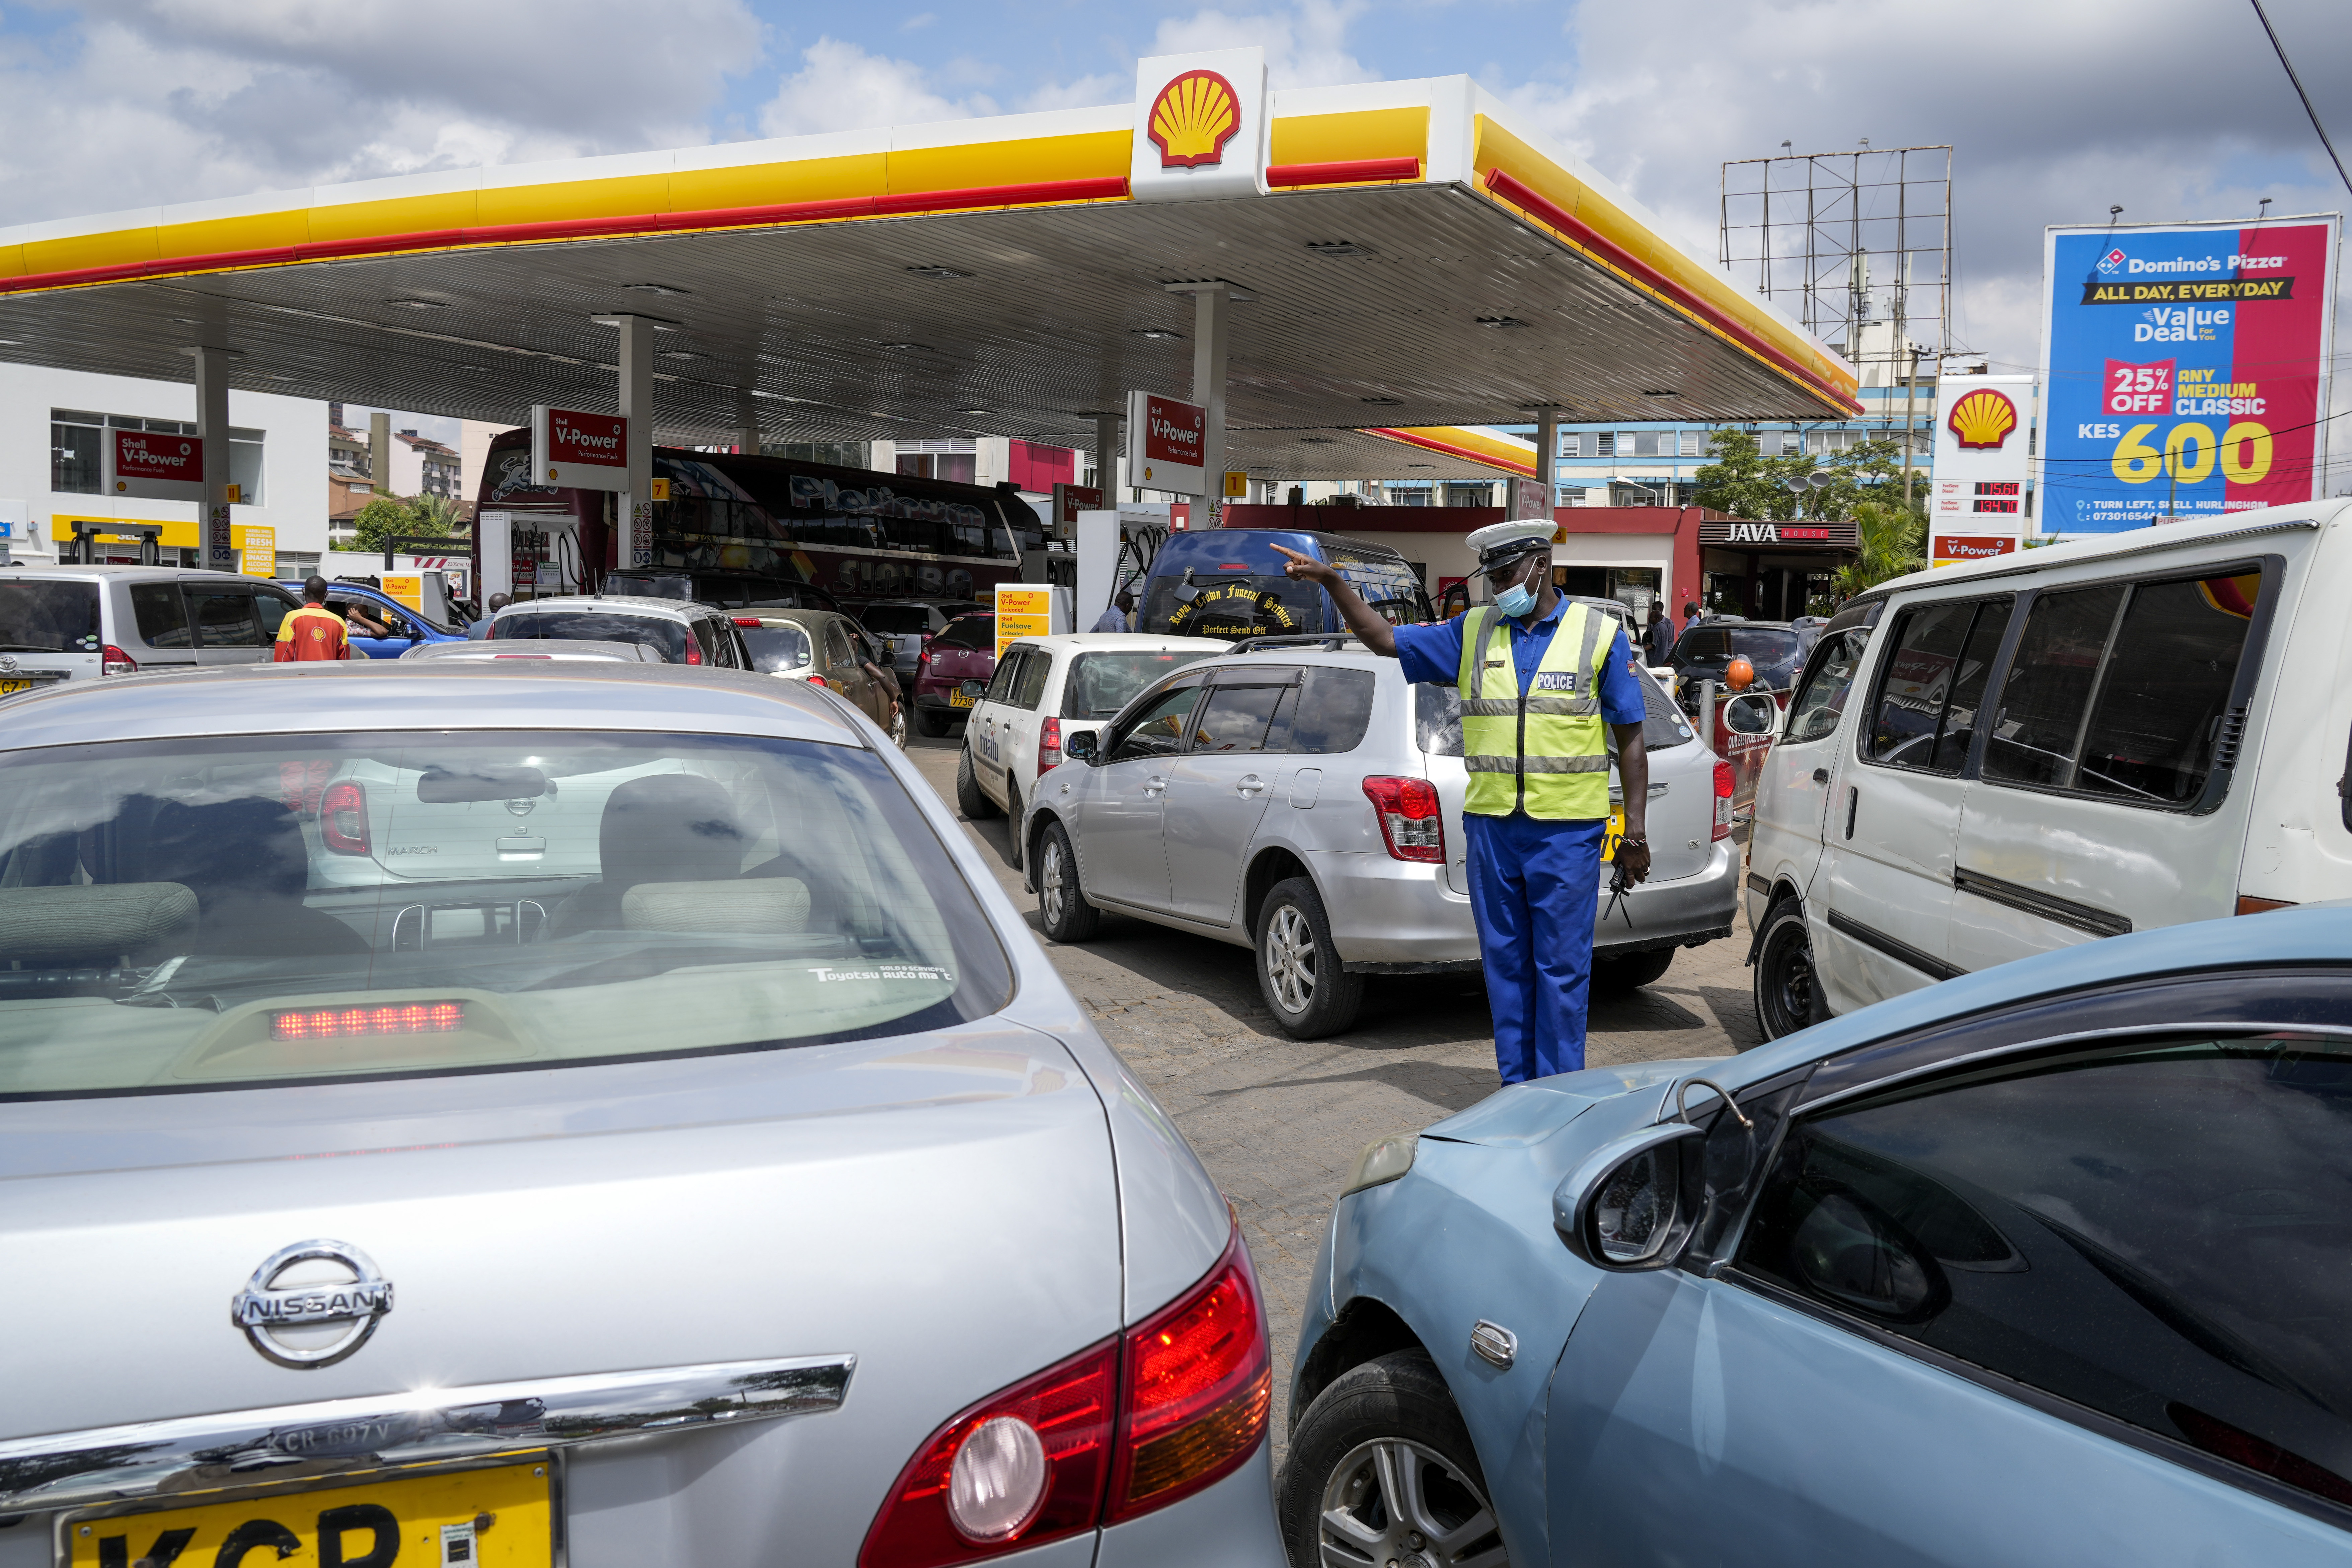 A policeman directs motorists queueing to buy gasoline at one of the gas stations with fuel still available for sale, in the Hurlingham neighborhood of the capital Nairobi, Kenya Thursday, April 14, 2022. For weeks Kenya has been suffering from shortages at gas stations with some having no fuel at all and at others long queues of motorists waiting to be served. (AP Photo/Khalil Senosi)